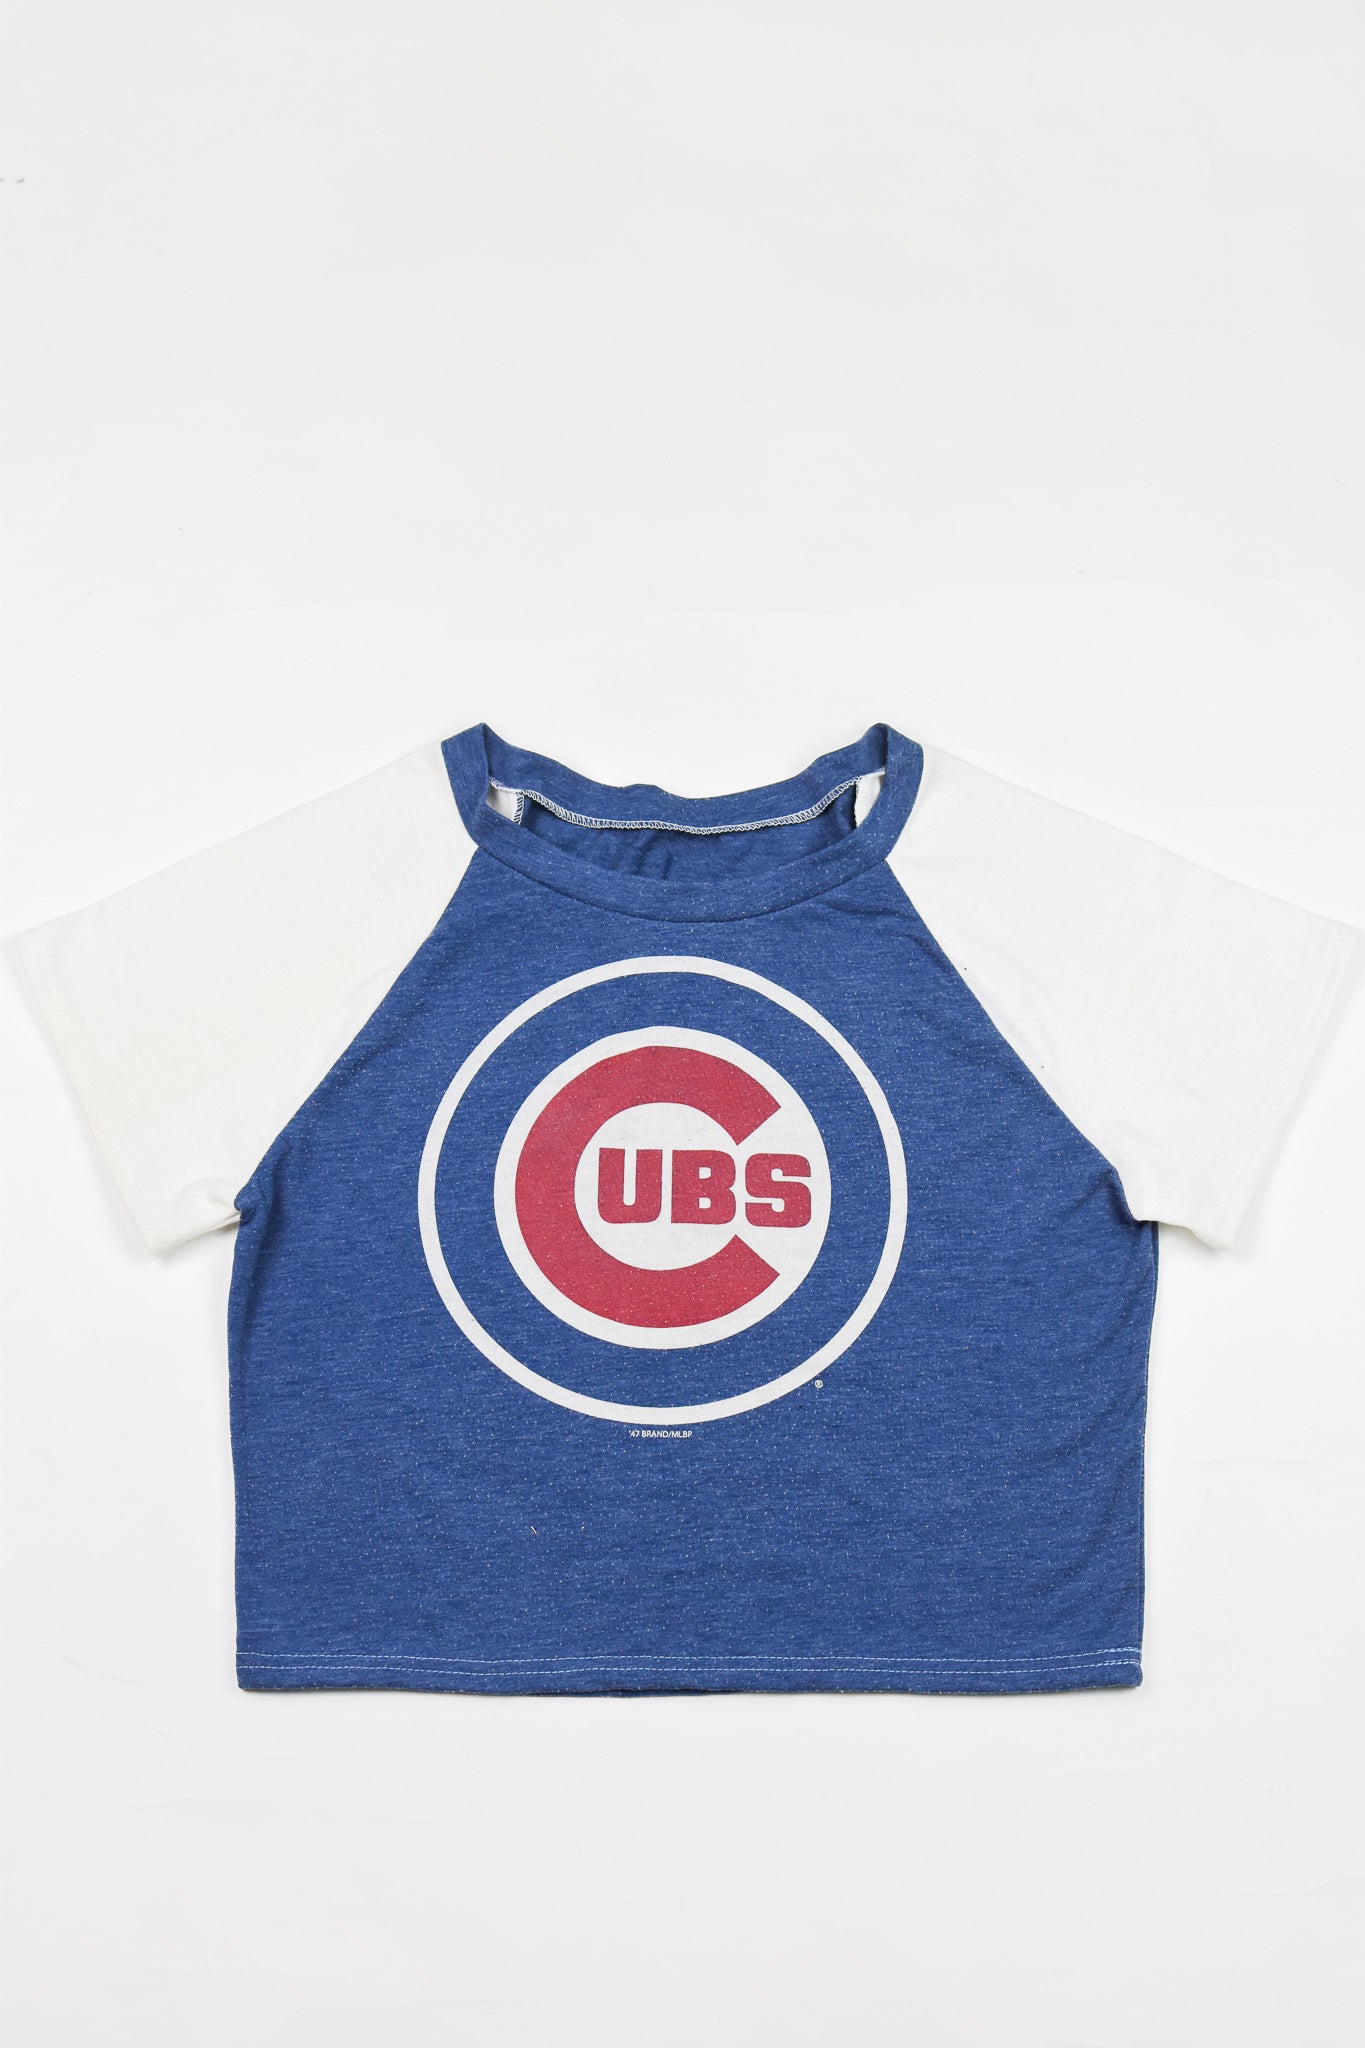 Upcycled Cubs Baby Tee